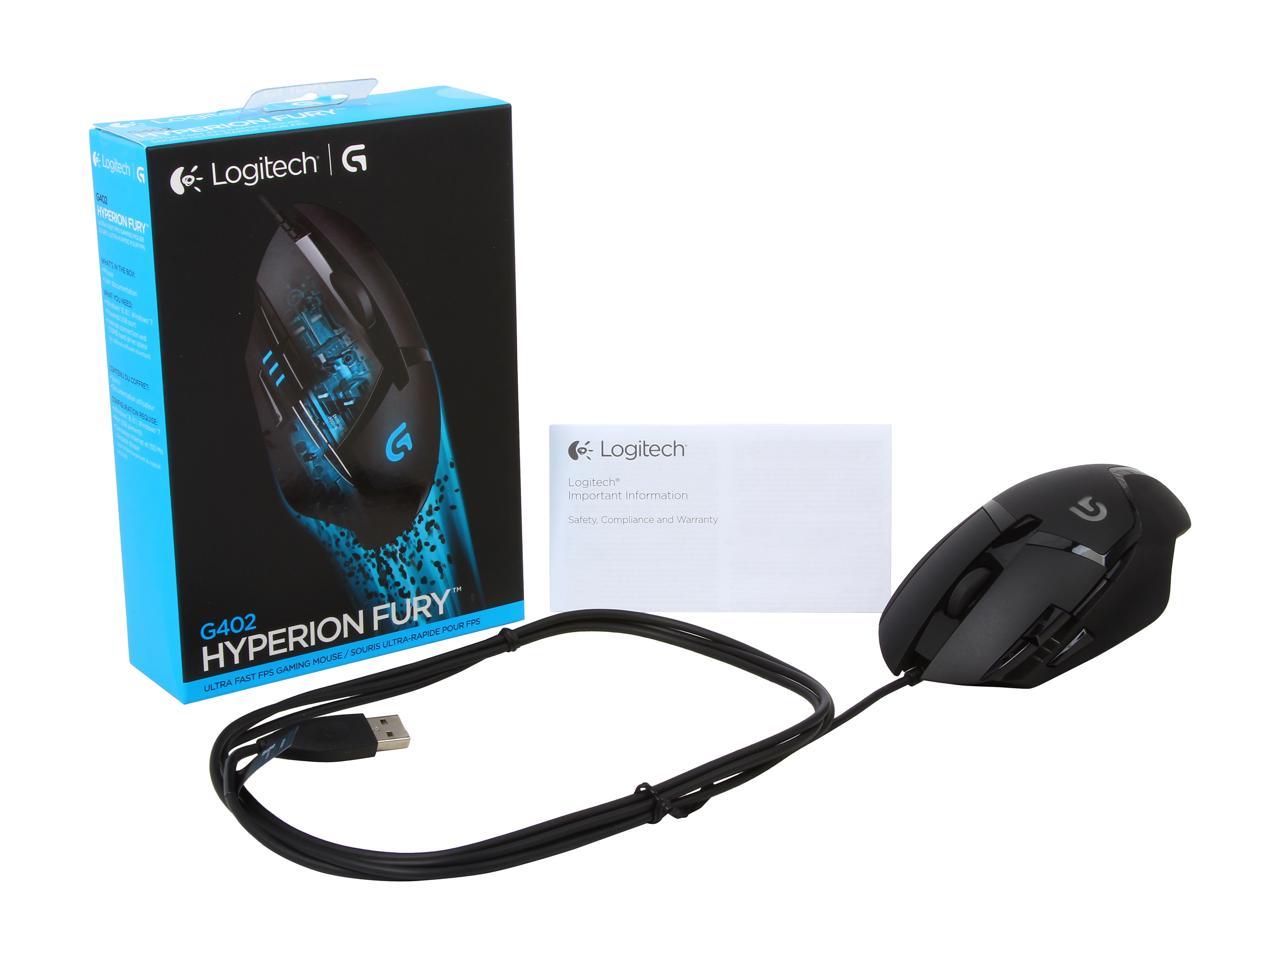 Logitech G402 910 Black Wired Optical Hyperion Fury Fps Gaming Mouse With High Speed Fusion Engine Newegg Com